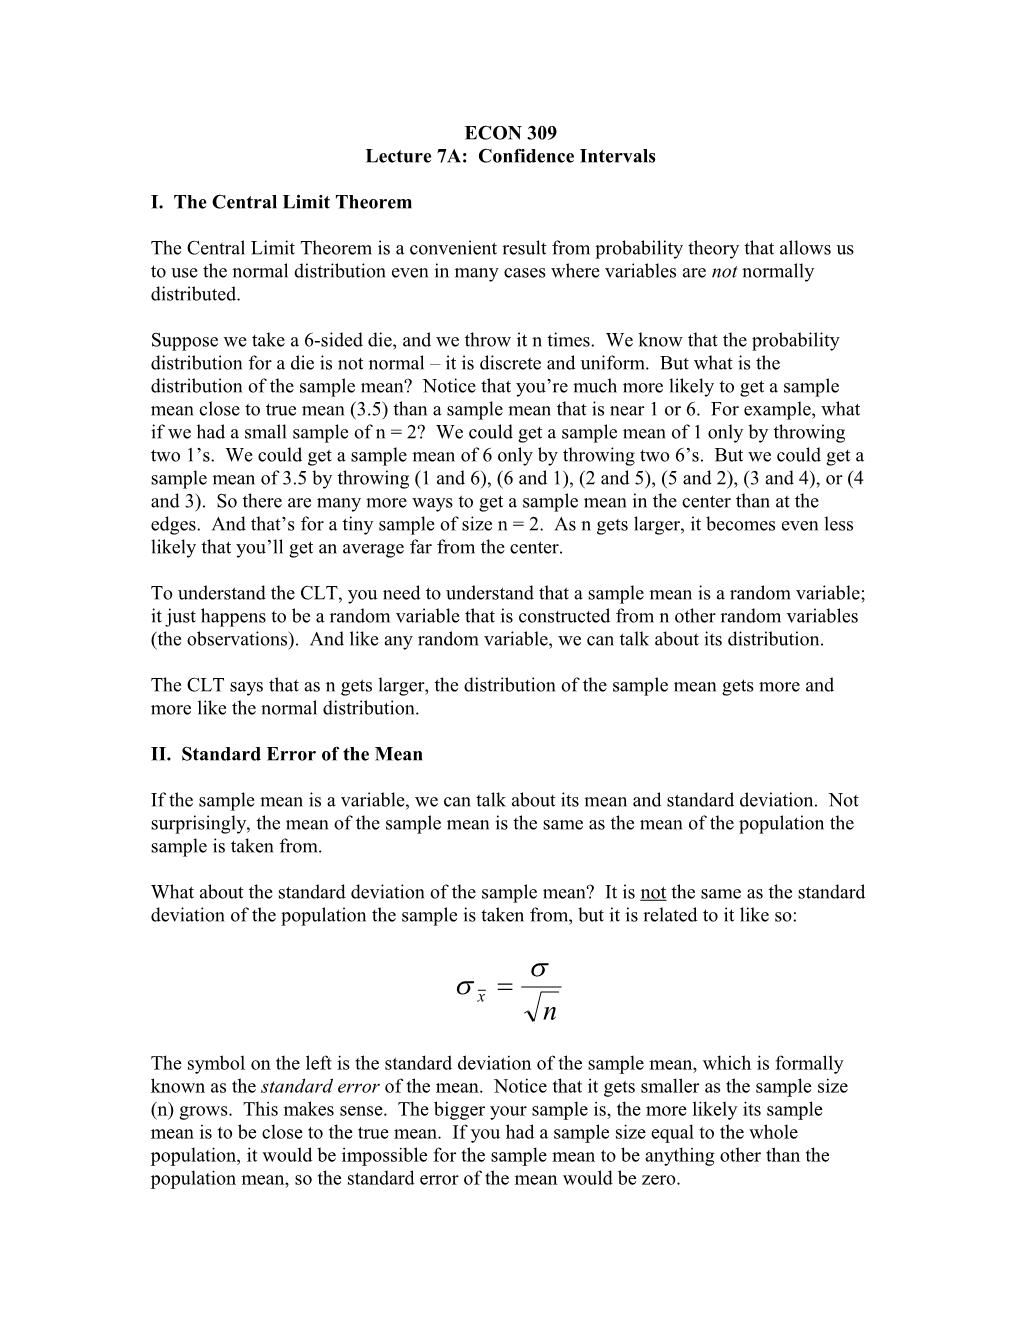 I. the Central Limit Theorem